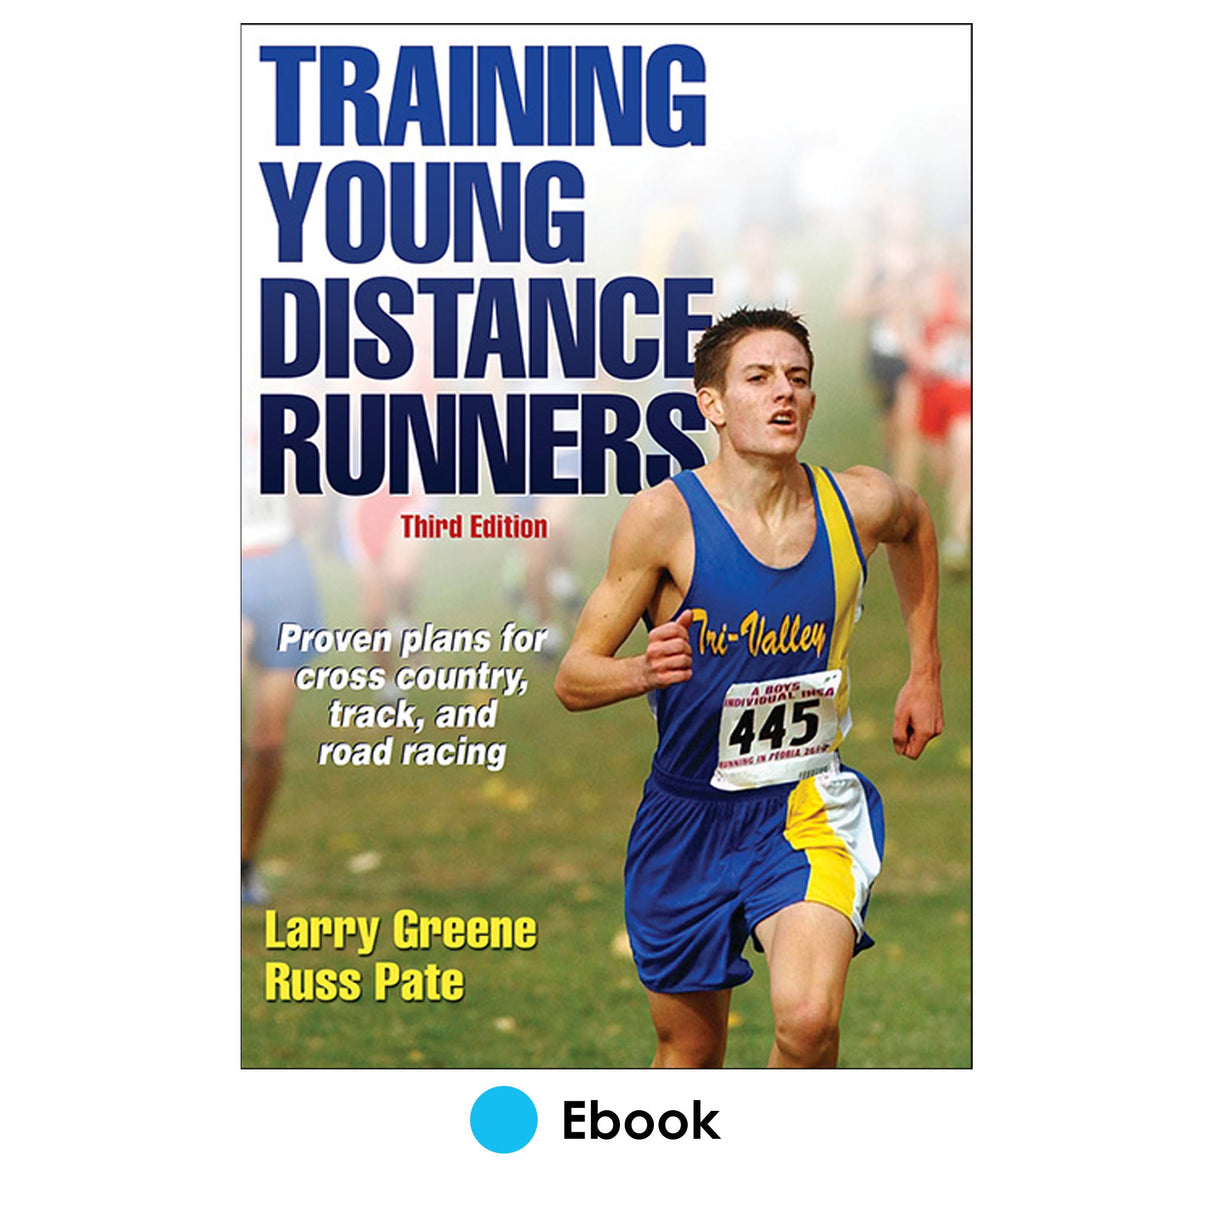 Training Young Distance Runners 3rd Edition PDF